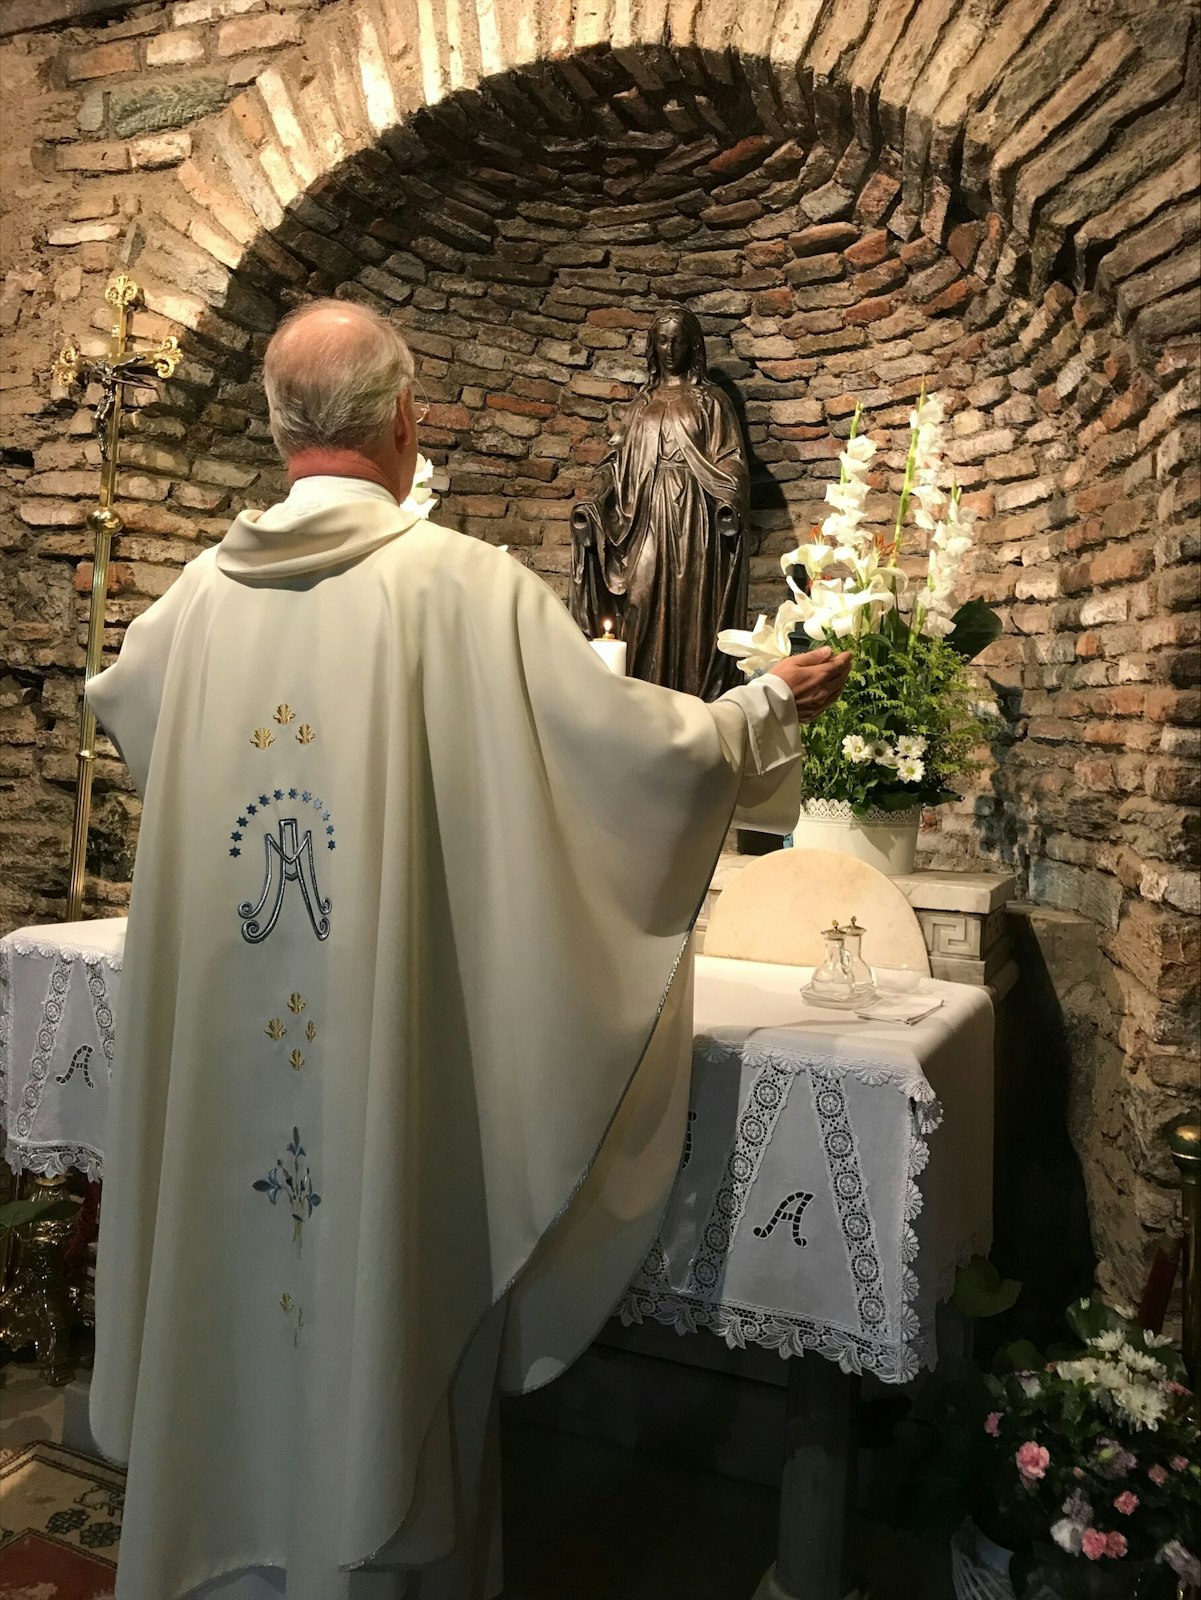 Archbishop Russell celebrates Mass at the house of the Blessed Virgin Mary in Ephesus. Ephesus was an ancient Greek city on the coast of Ionia, two miles southwest of present-day Selçuk in İzmir Province, Turkey. (Courtesy of Archbishop Paul F. Russell)